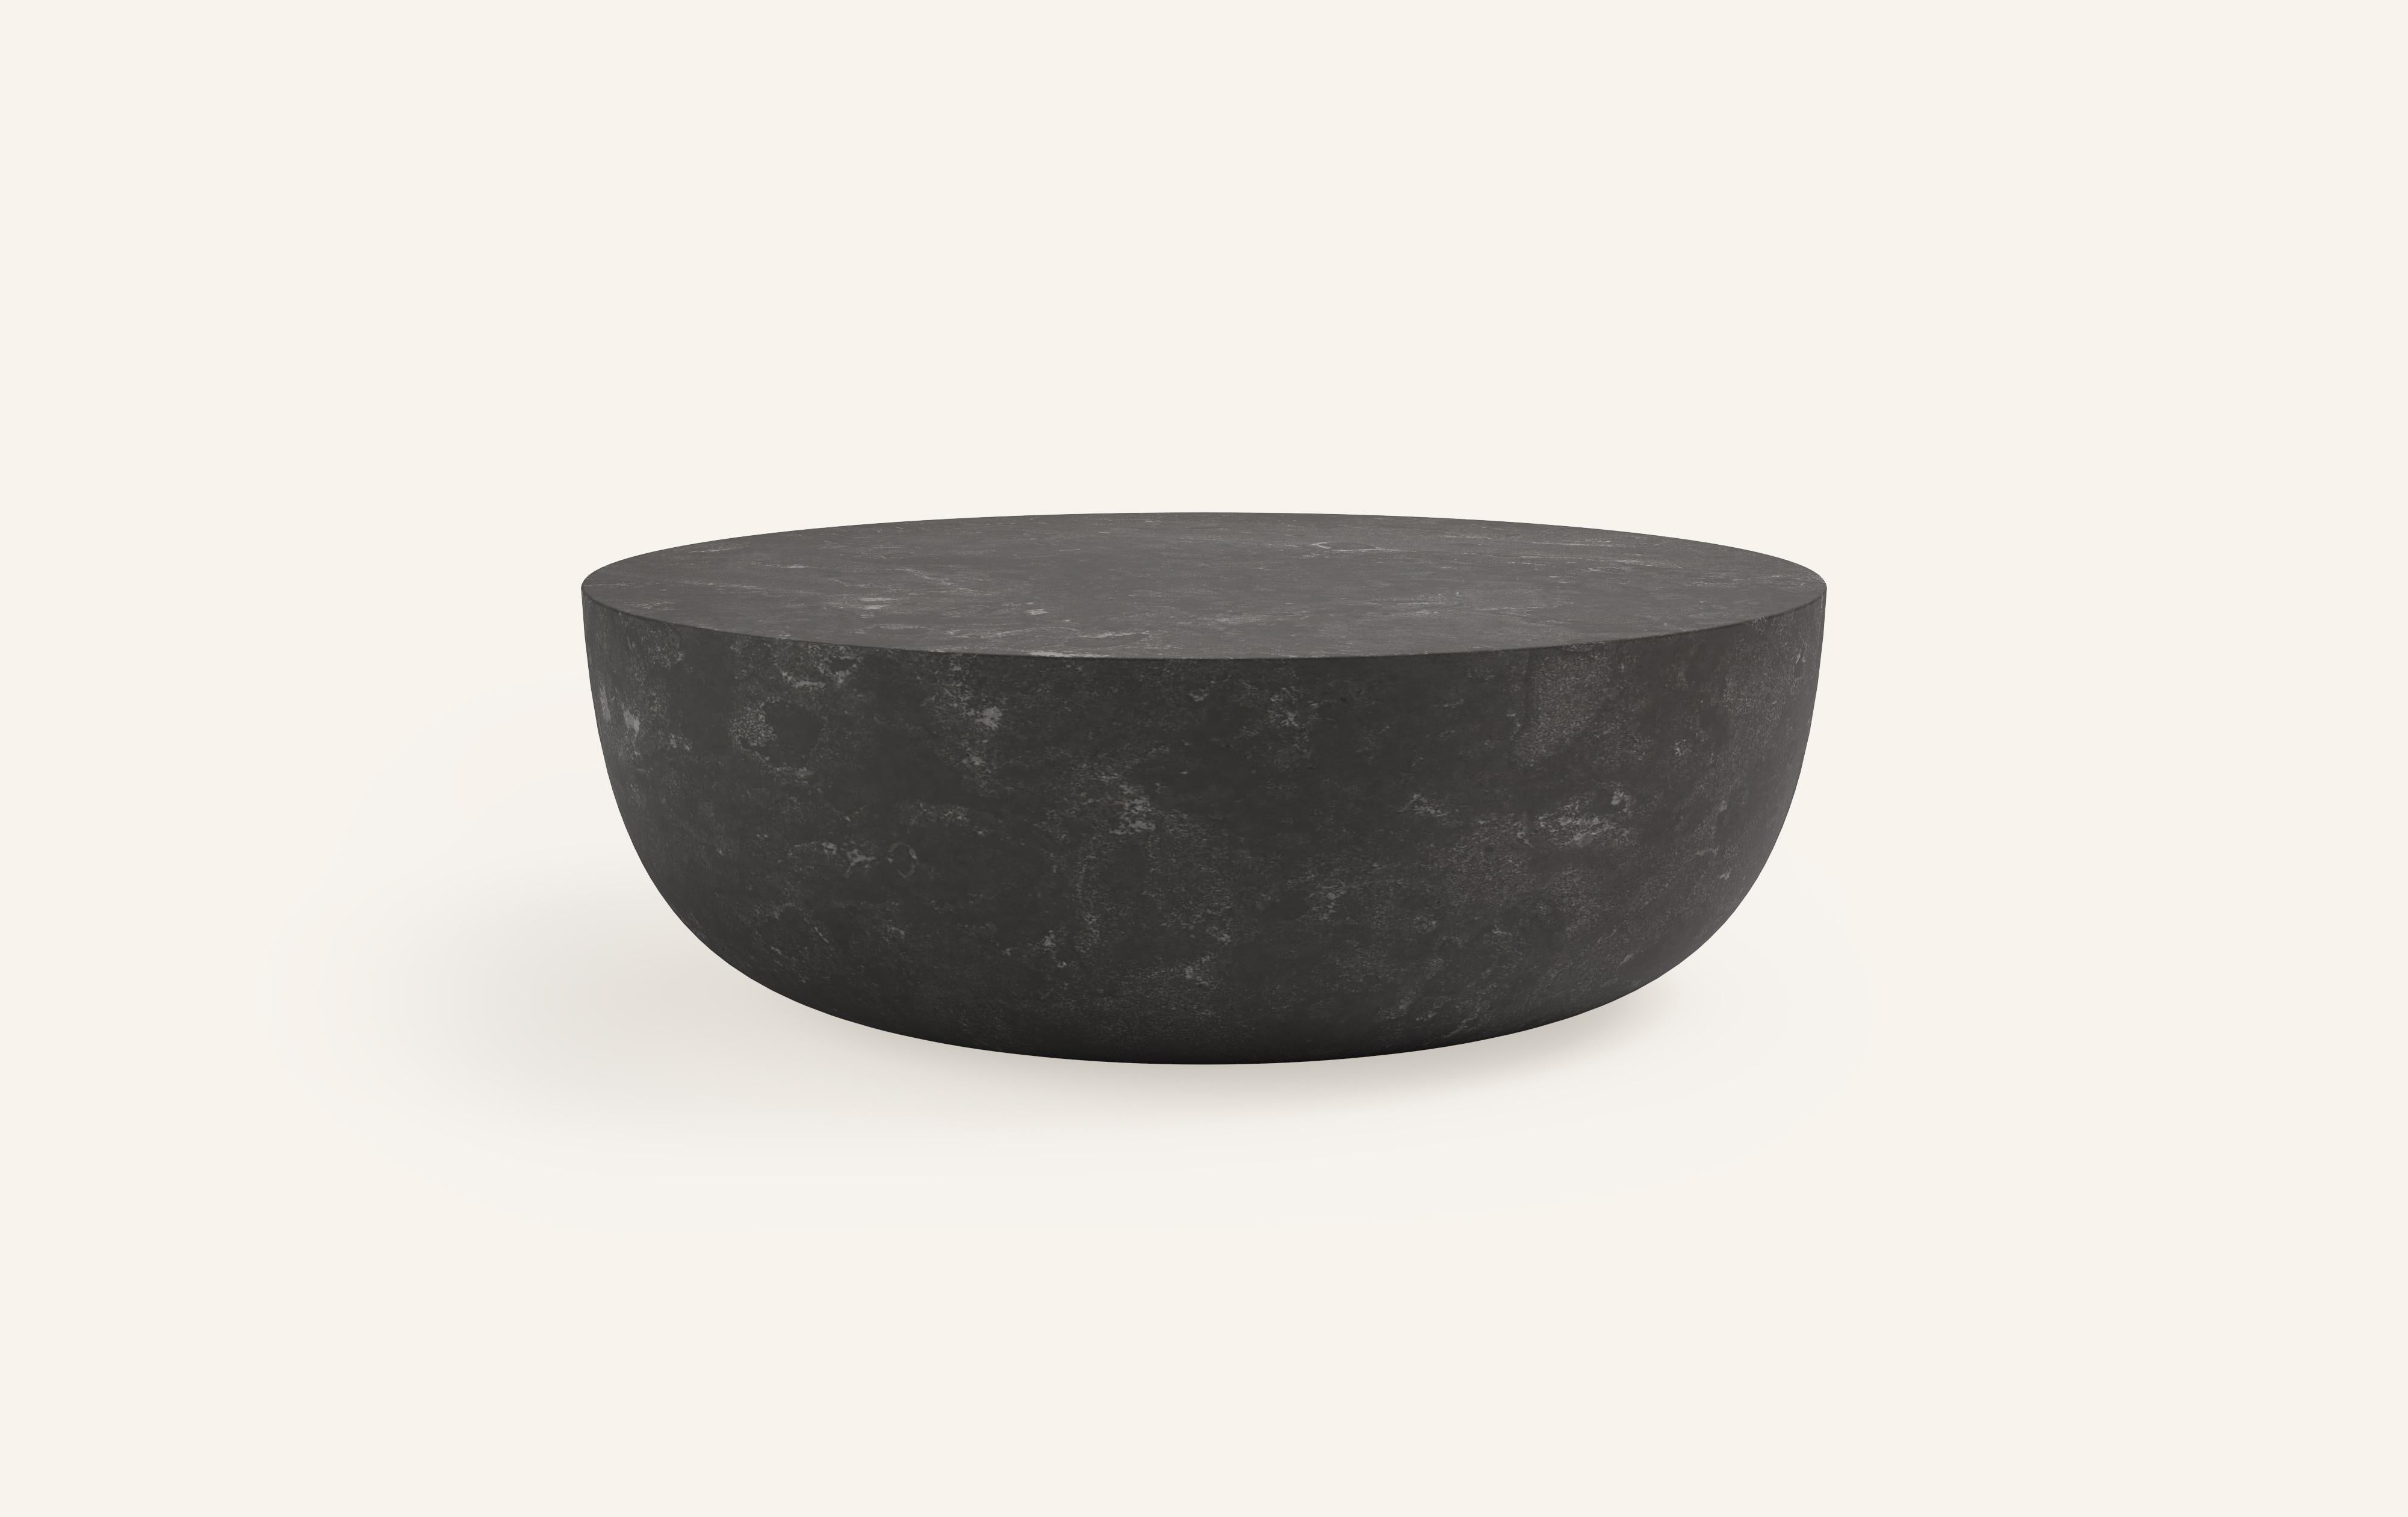 A SLICE OF A ’SPHERE’ OR 'SFERA' IN ITALIAN BALANCES A FLAT SURFACE ATOP AND ROBUST MONOLITH FORM. WITH A BASE SOFTENED BY A CURVED PROFILE, SFERA IS SOFT AND EARTHY IN ITS AVAILABLE STONE SELECTIONS.

DIMENSIONS: 
54”L x 54”W x 16”H: 
- SOLID